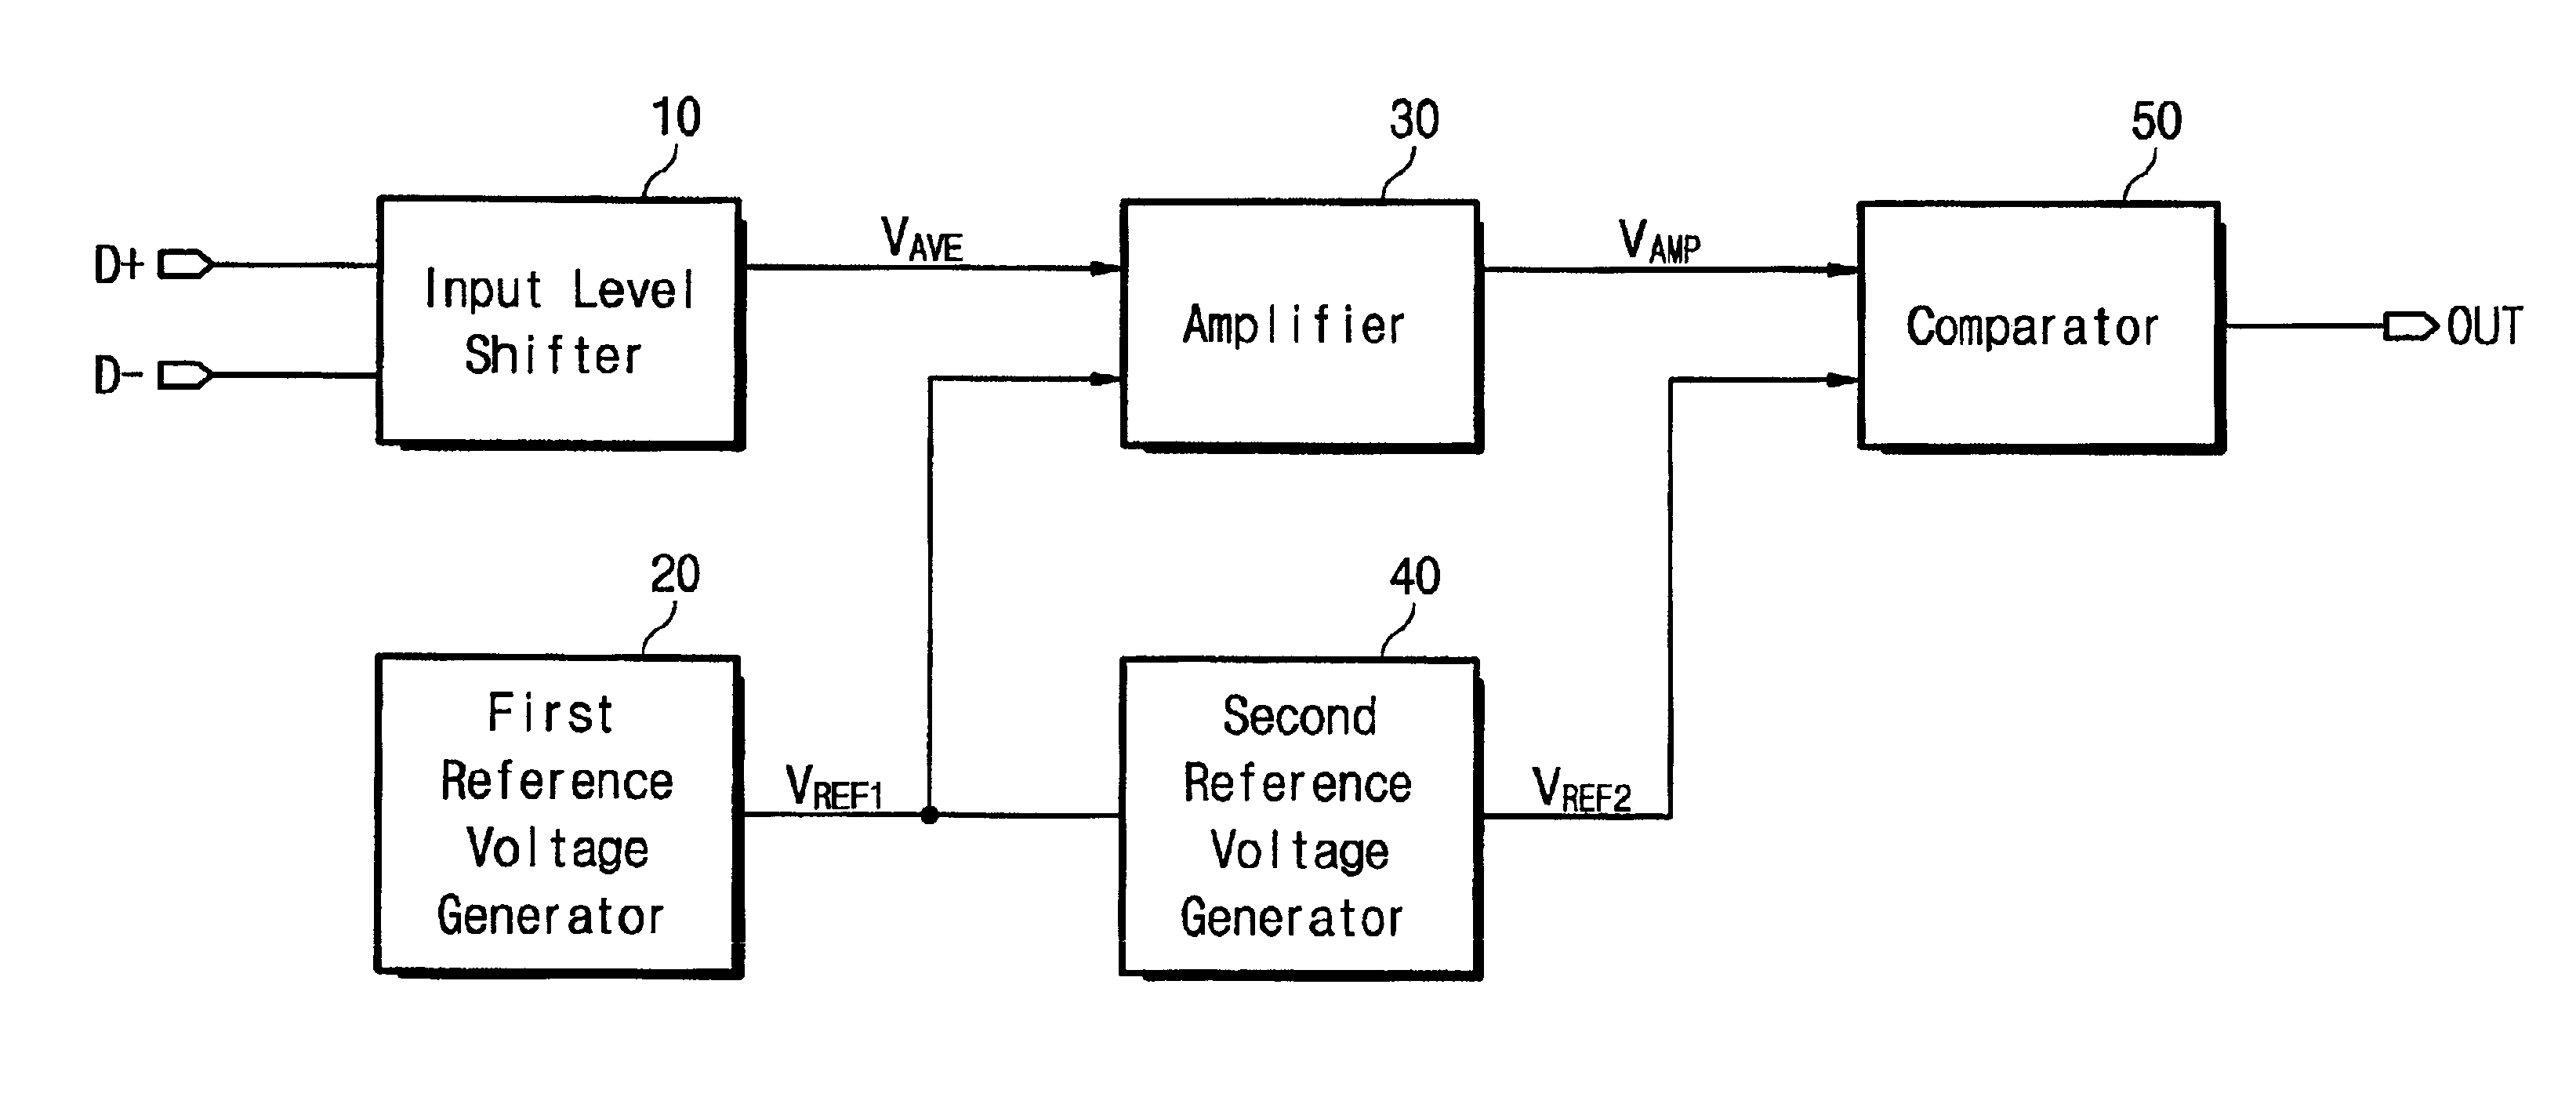 Squelch detection circuit